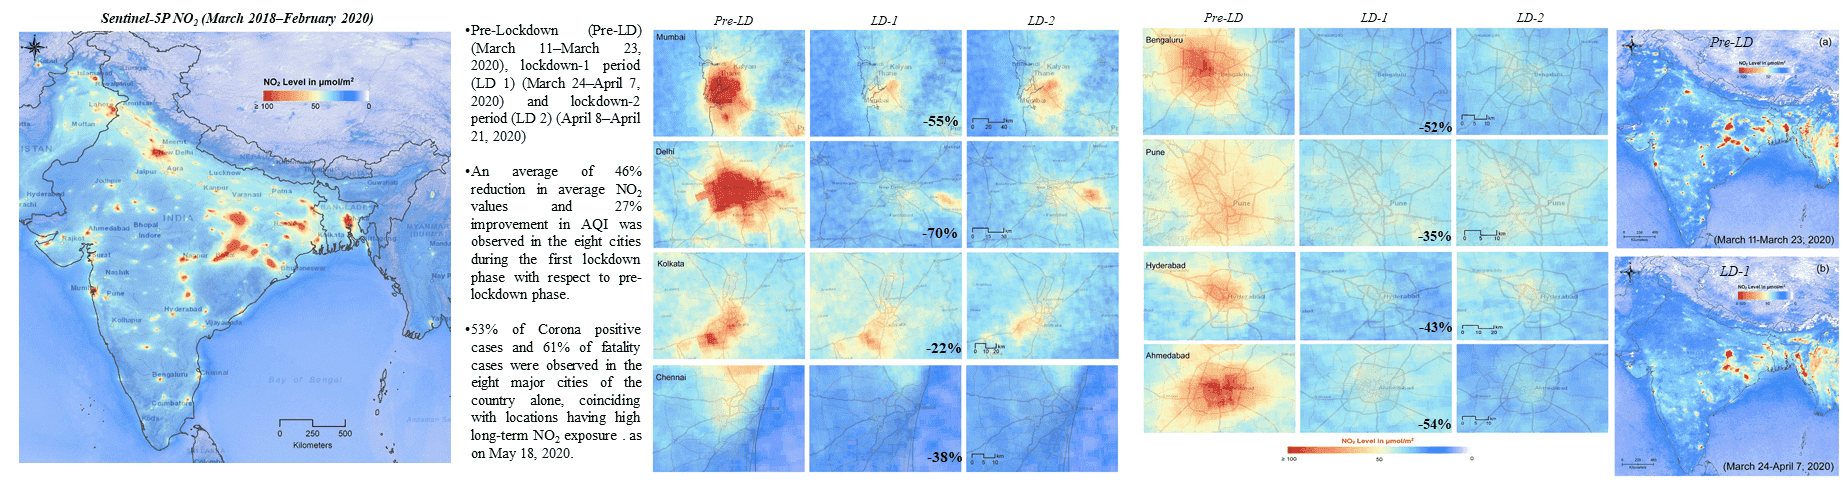 Image of COVID-19 Pandemic and City-Level Nitrogen Dioxide (NO2) Reduction for Urban Centres of India